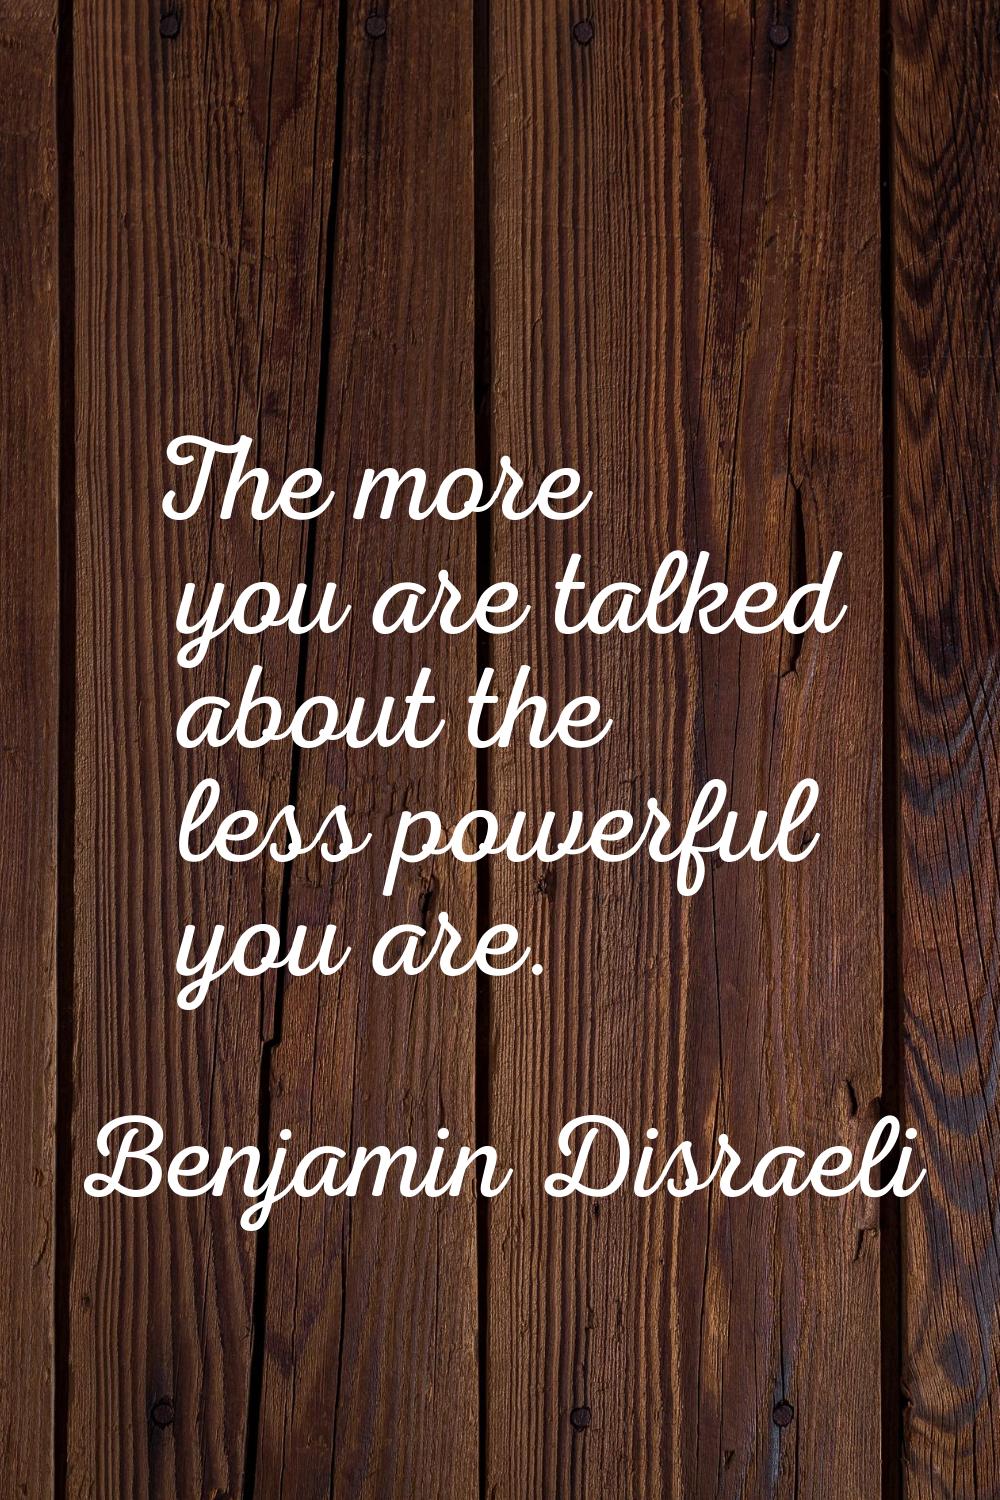 The more you are talked about the less powerful you are.